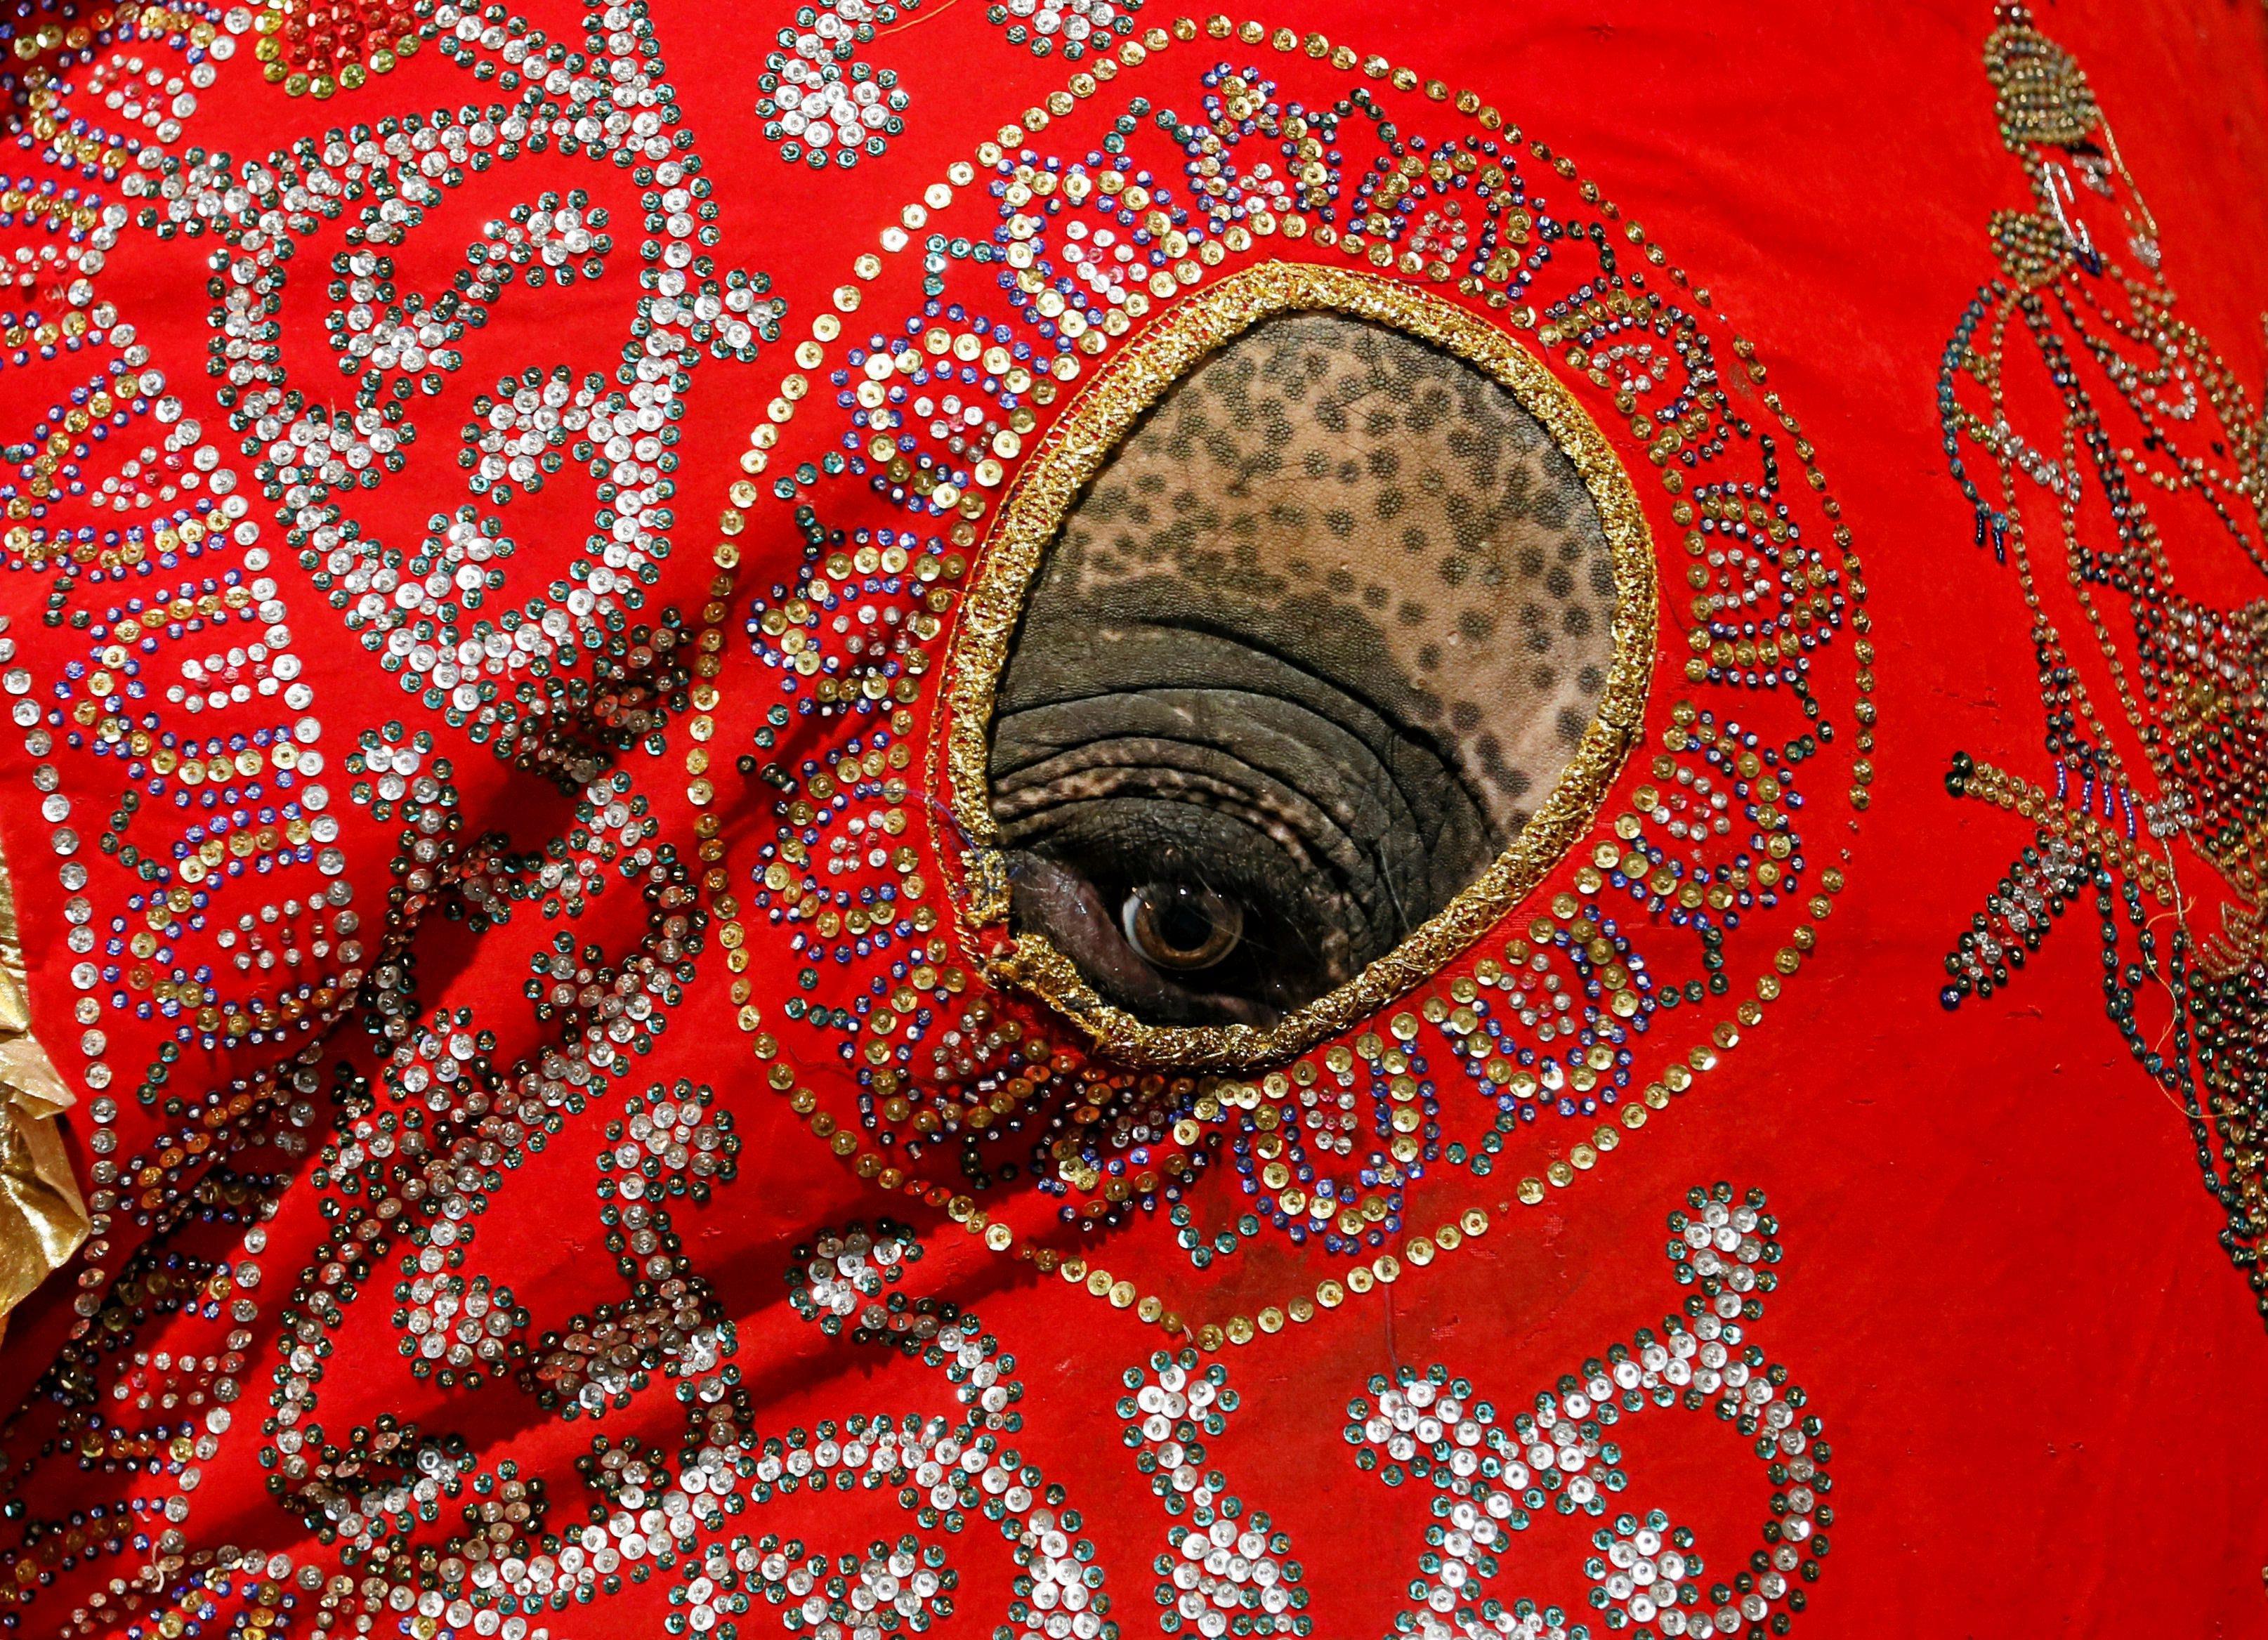 An elephant decorated with a cloth walk during the annual Nawam Perahera (street pageant) in Colombo